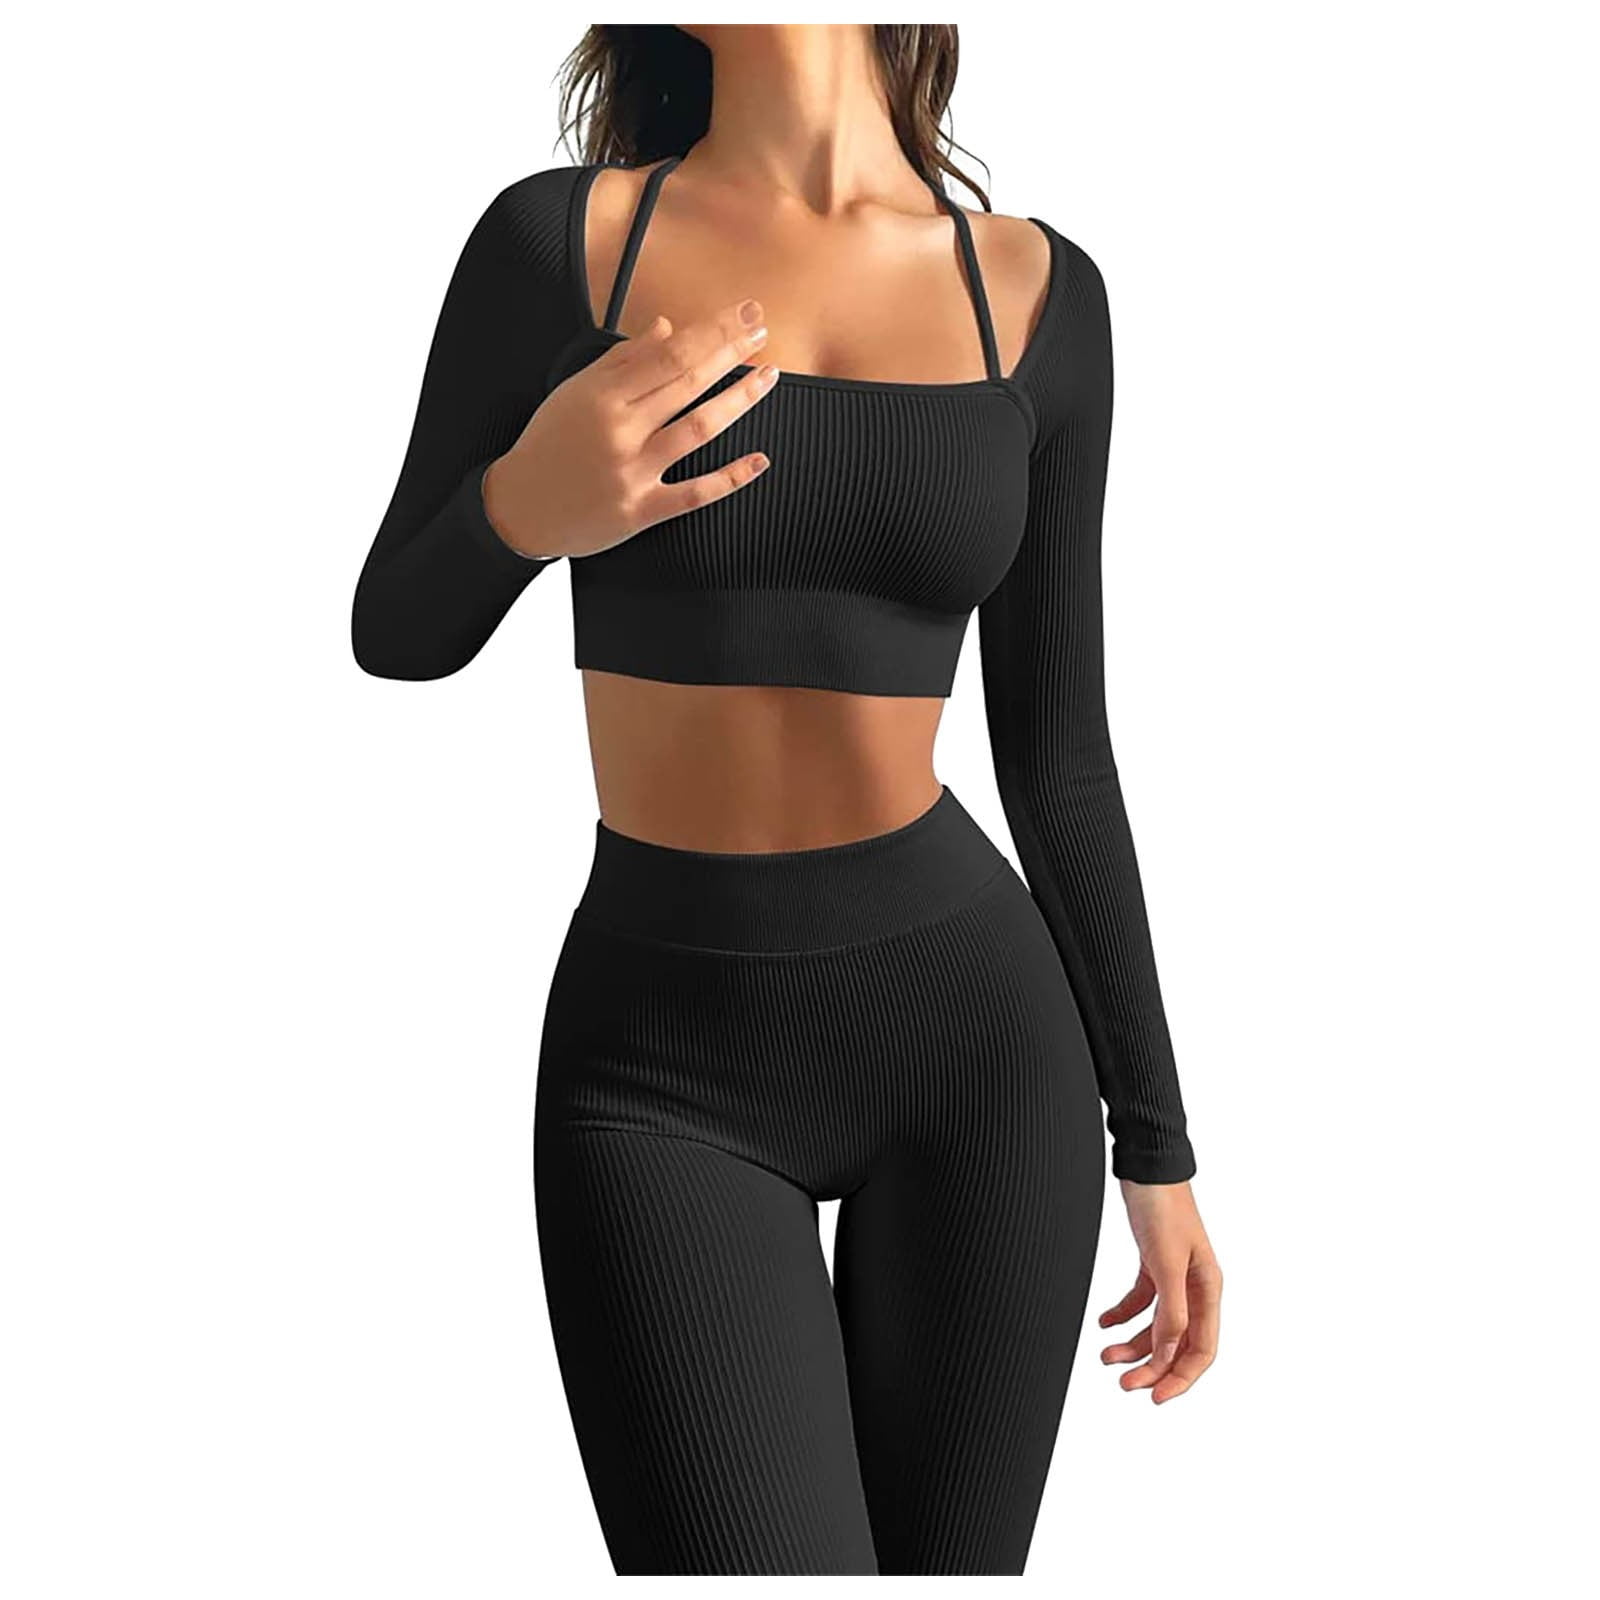 Buy GXIN Women's Workout 2 Piece Outfits Seamless Sexy Yoga Crop Tops Gym  High Waist Running Leggings Sets, Black, Large at